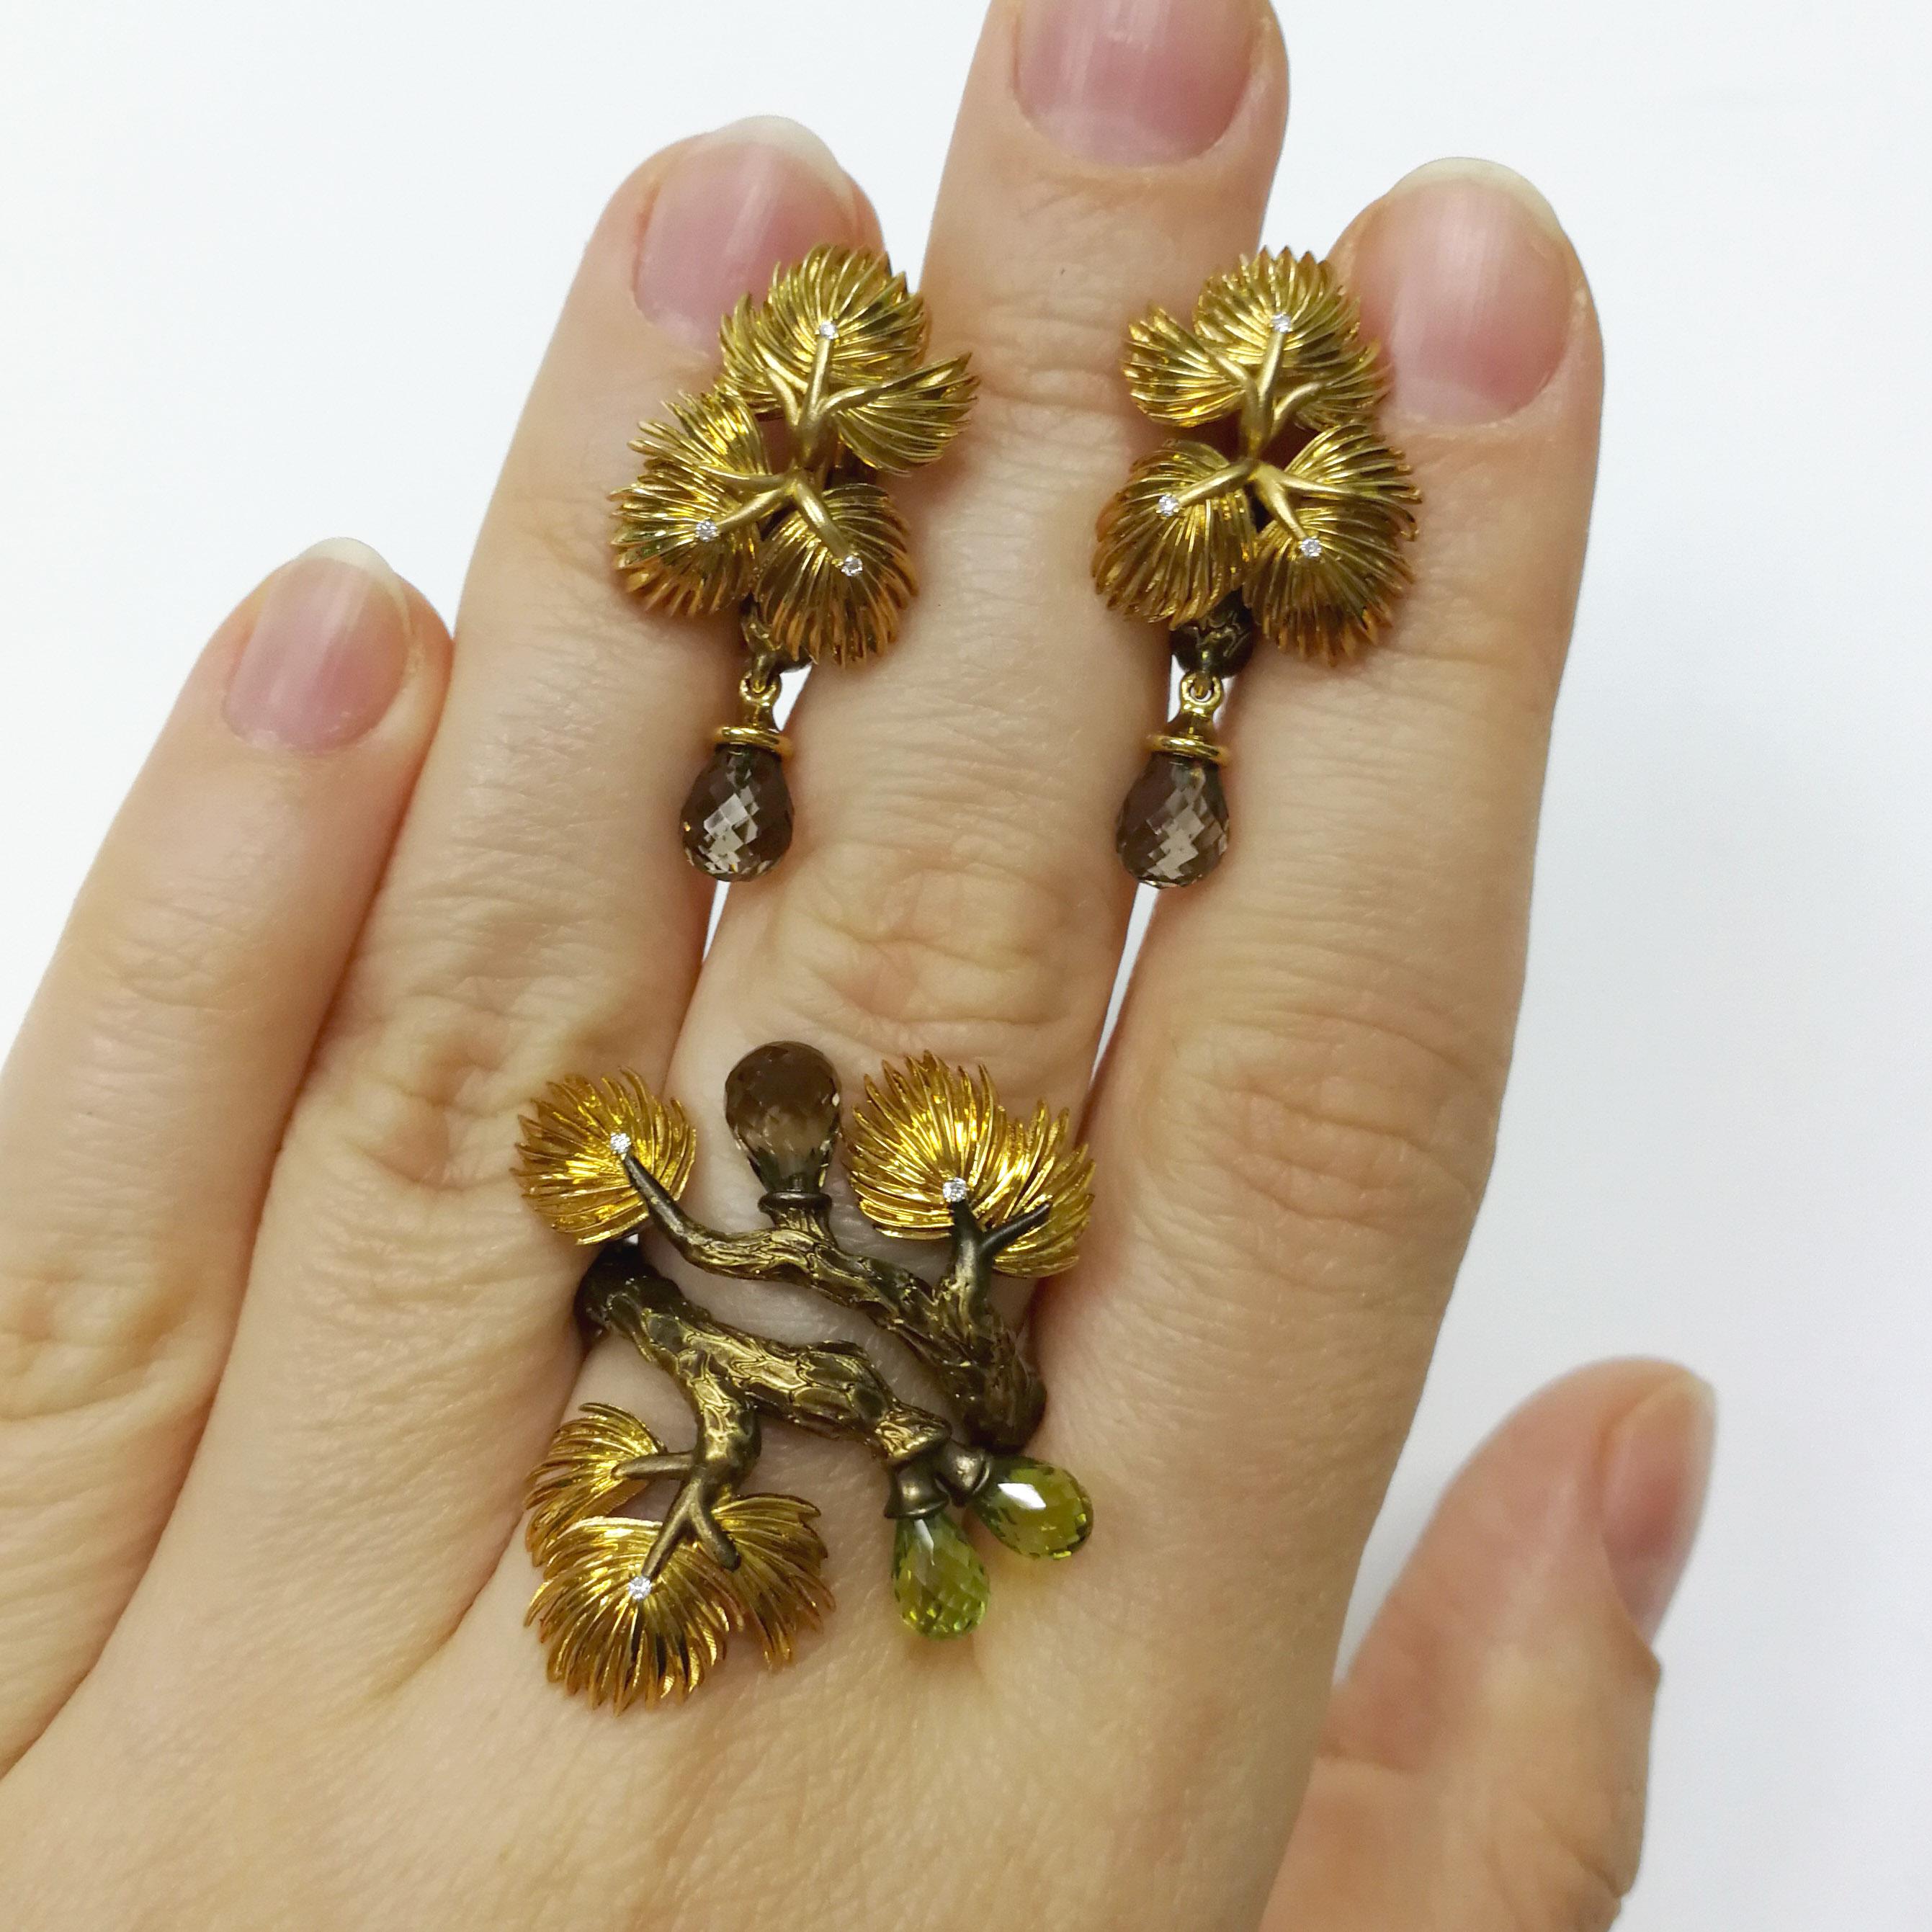 Peridot Smoky Quartz Diamonds 18 Karat Yellow Gold Pine Suite
The evergreen Pine is a symbol of immortality and vitality. Even in winter, when nature sleeps, this beautiful green tree reminds us that spring is coming. Our Suite from Forest